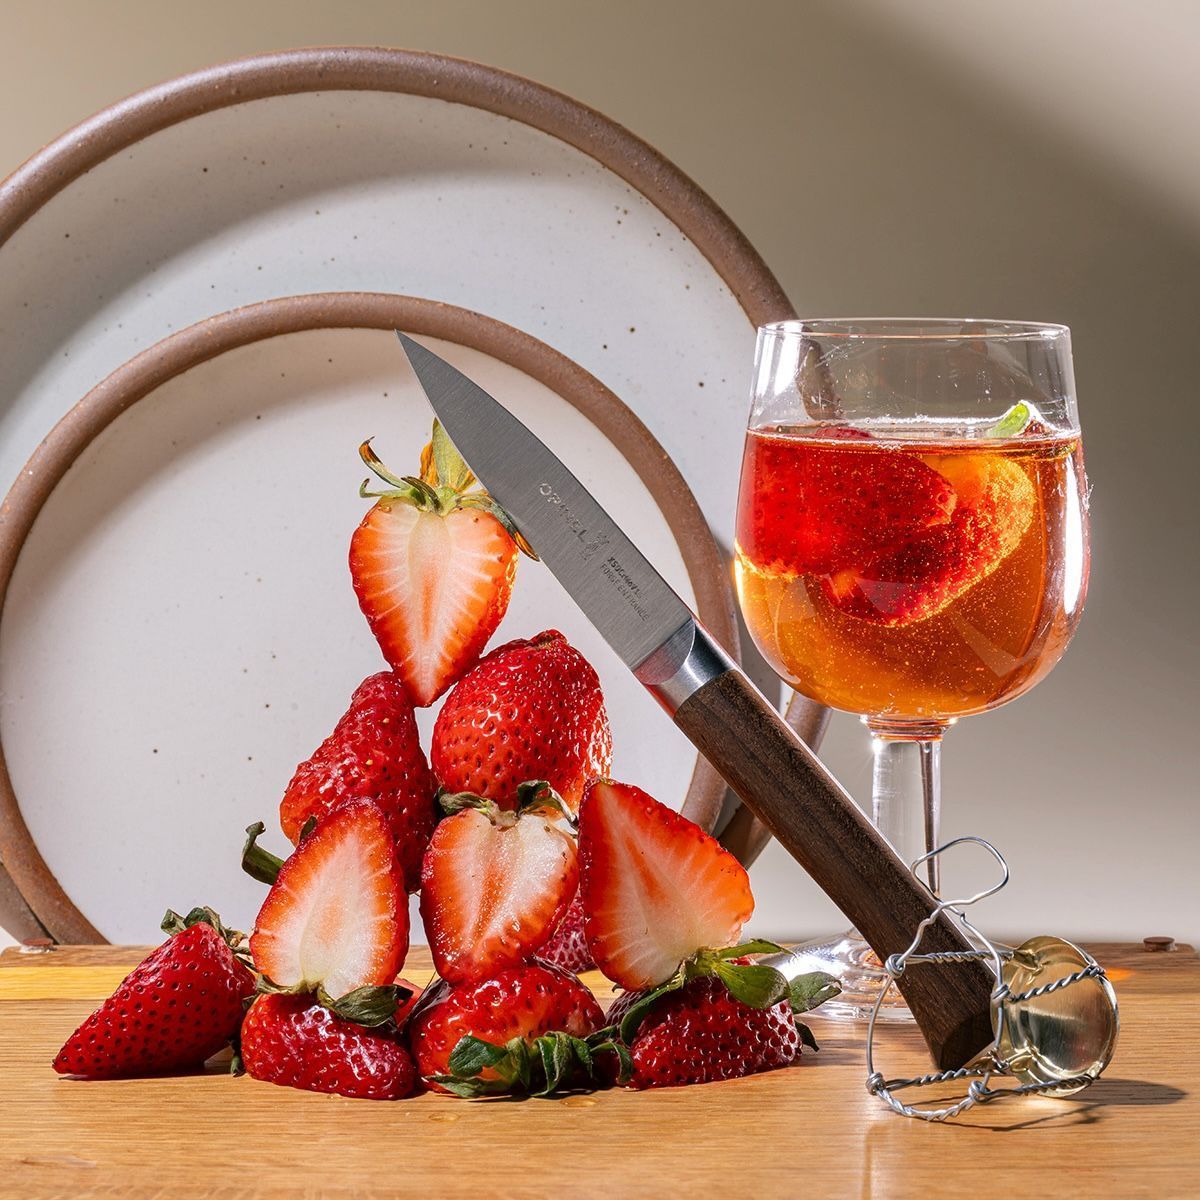 A small paring knife is leaning against a tower of sliced strawberries and sitting on a cutting board. Nearby are a stack of white ceramic plates in the background and a wine glass filled with a sparkling drink and sliced strawberries. The knife has a sharp steel blade and a beveled dark wood handle